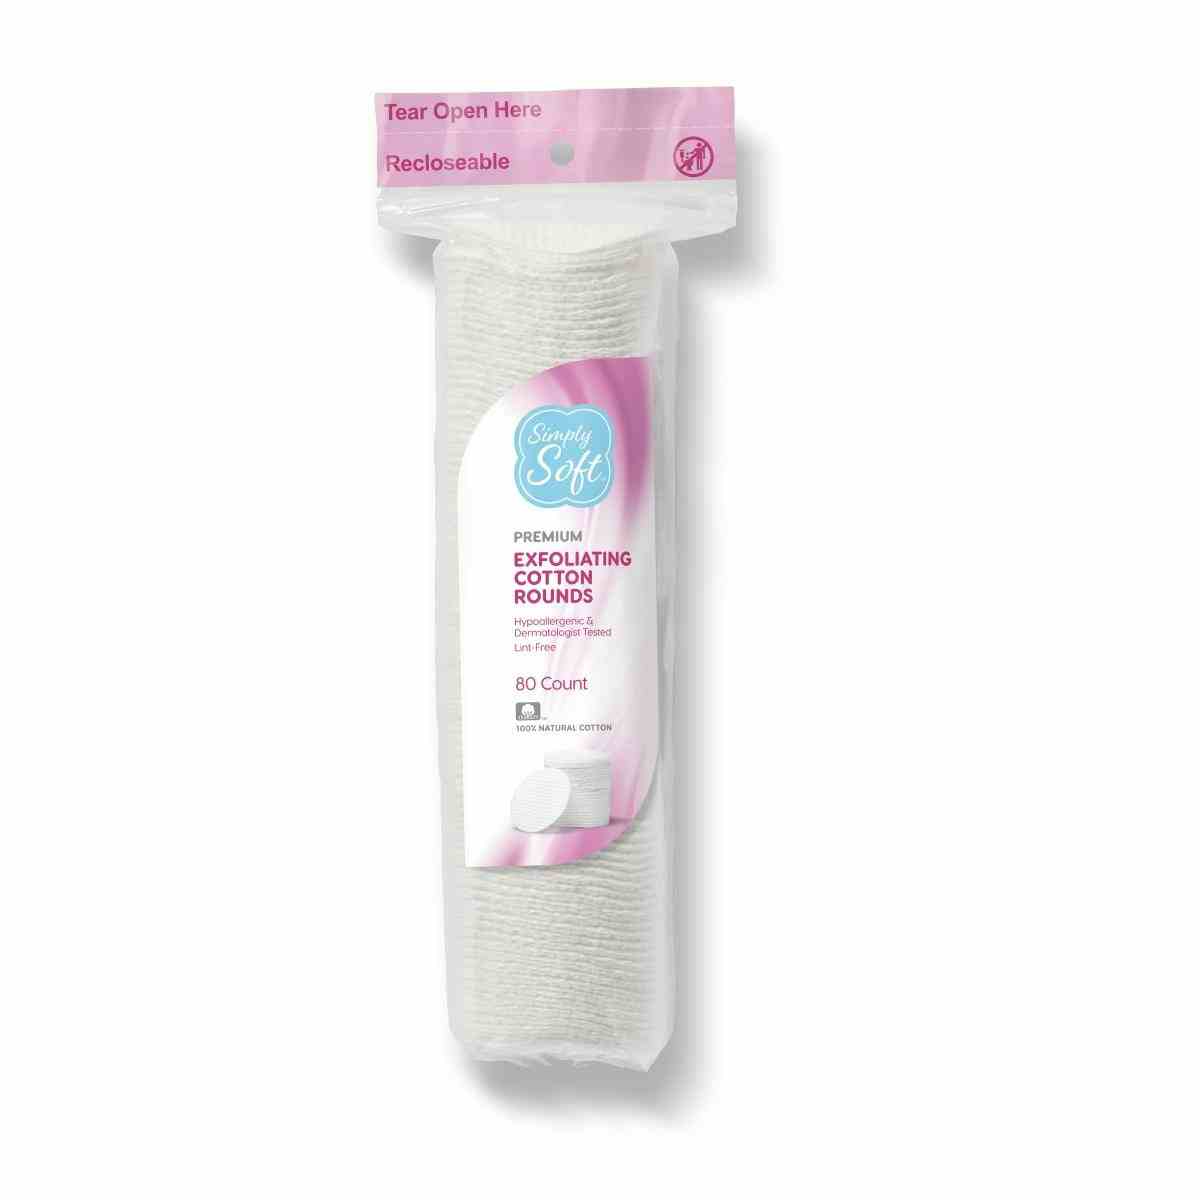 Simply Soft Exfoliating Cotton Rounds, RSS10007, Case of 24